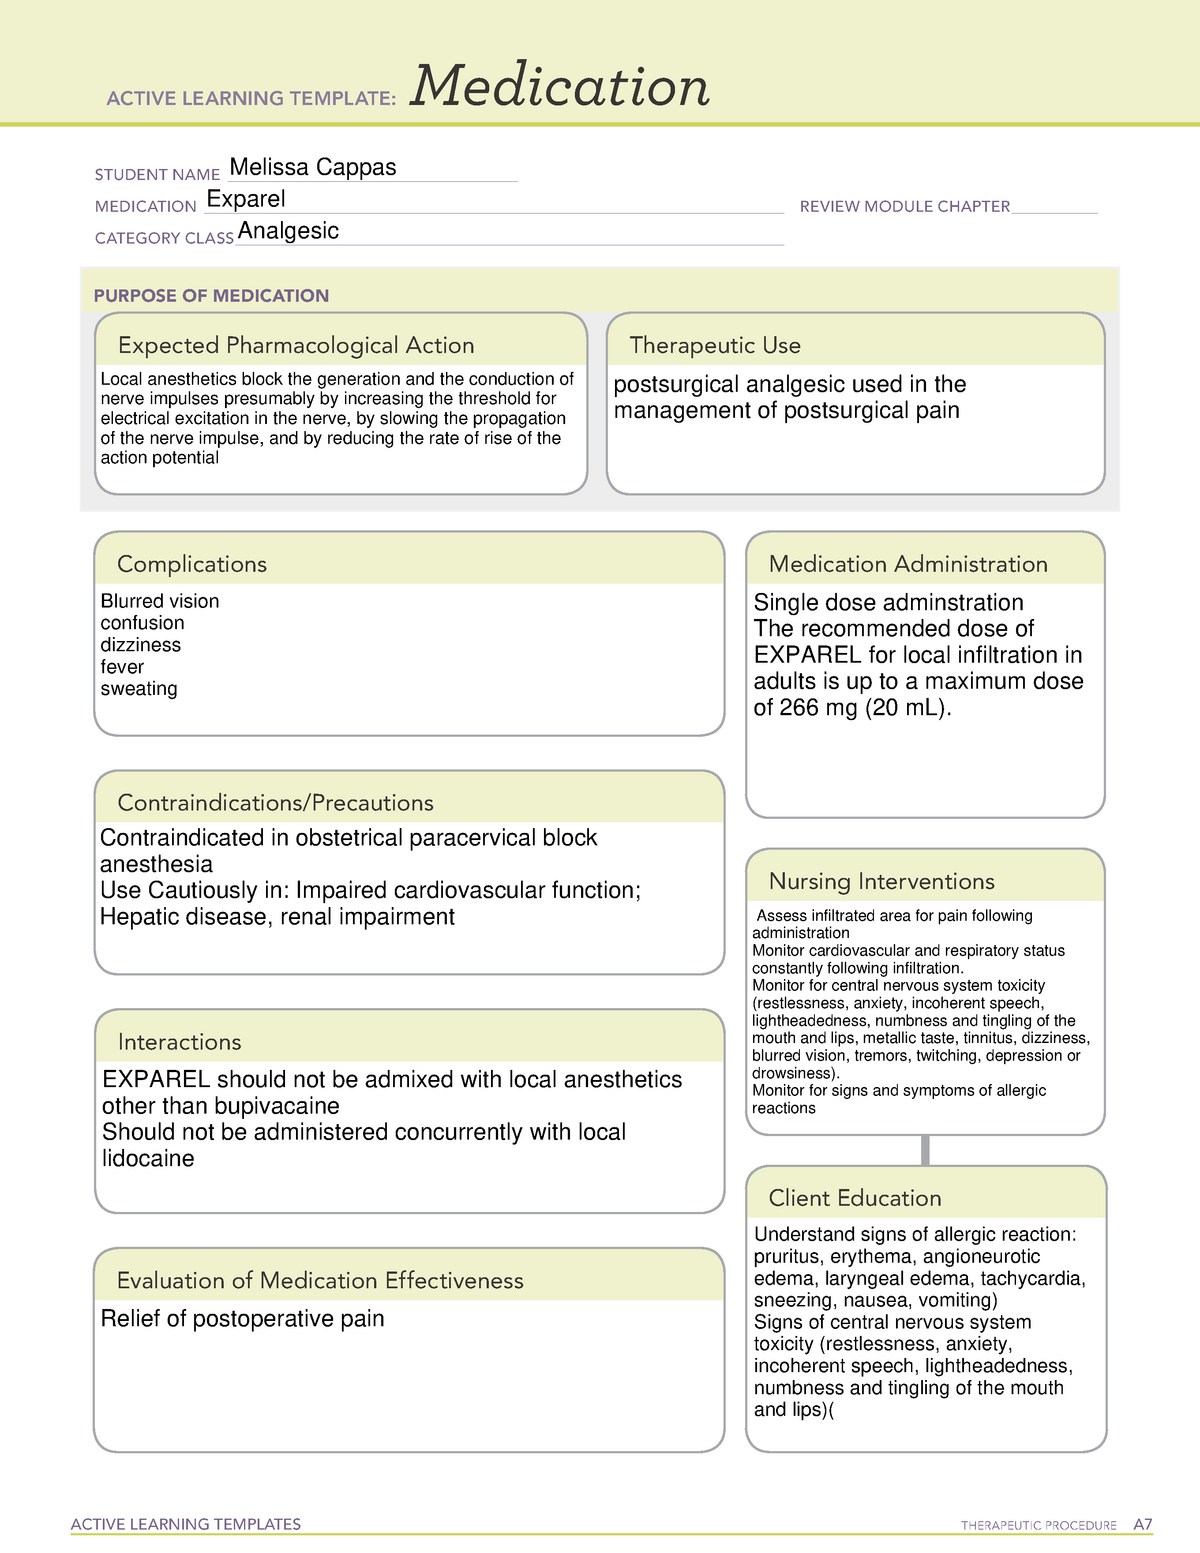 Exparel med card ati template - ACTIVE LEARNING TEMPLATES THERAPEUTIC ...